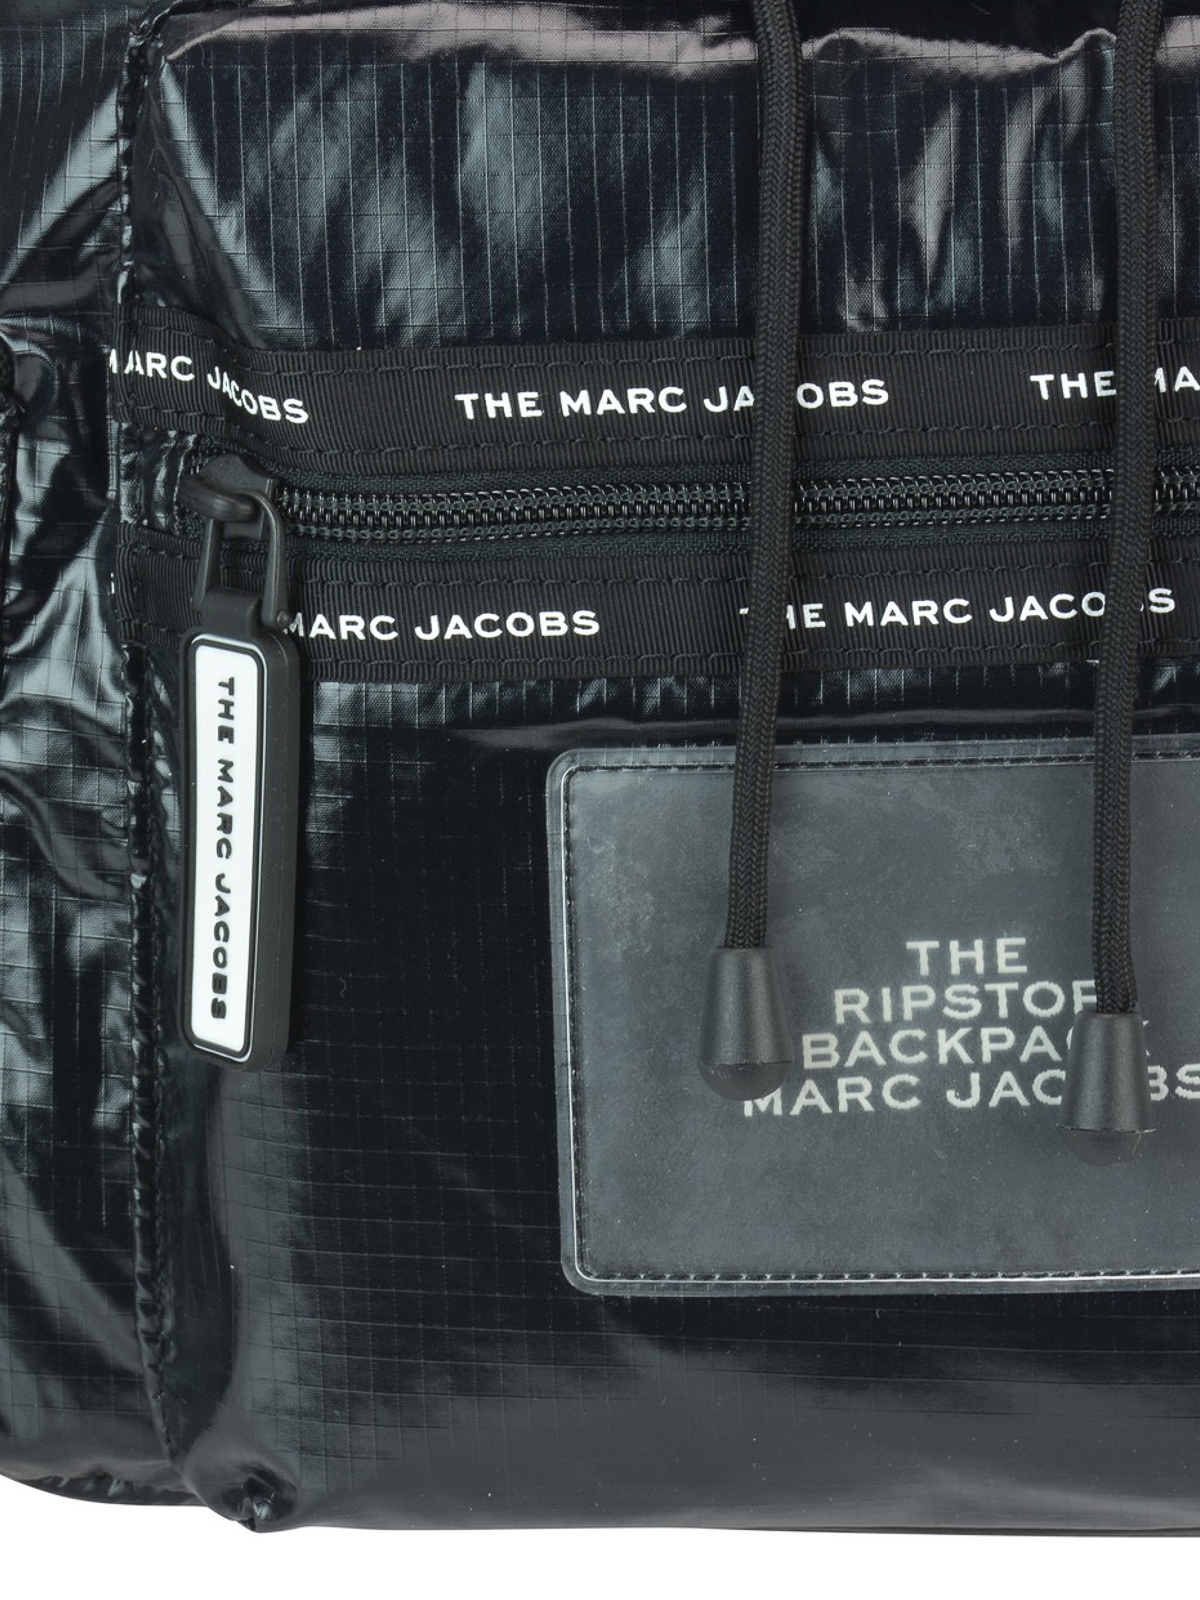 Backpacks Marc Jacobs - The Ripstop backpack - M0015145001 | iKRIX.com